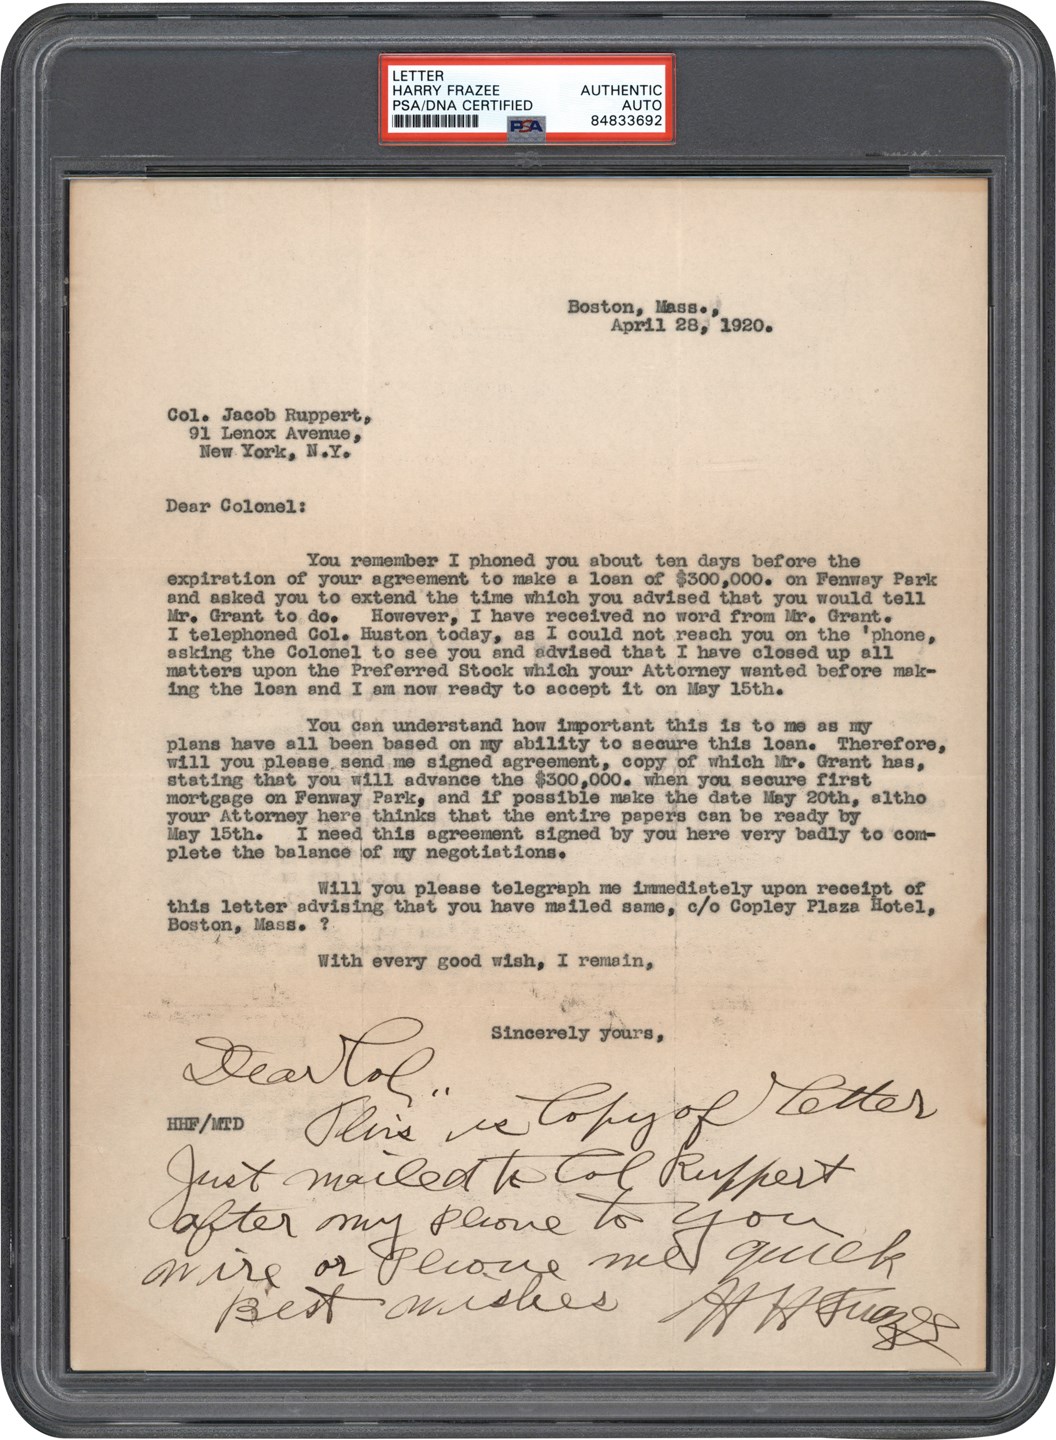 - 1920 Harry Frazee Desperation Letter to Colonel Tillinghast Huston Regarding $300,000 Loan Connected to the Babe Ruth Sale - From The Barry Halper Collection (PSA)